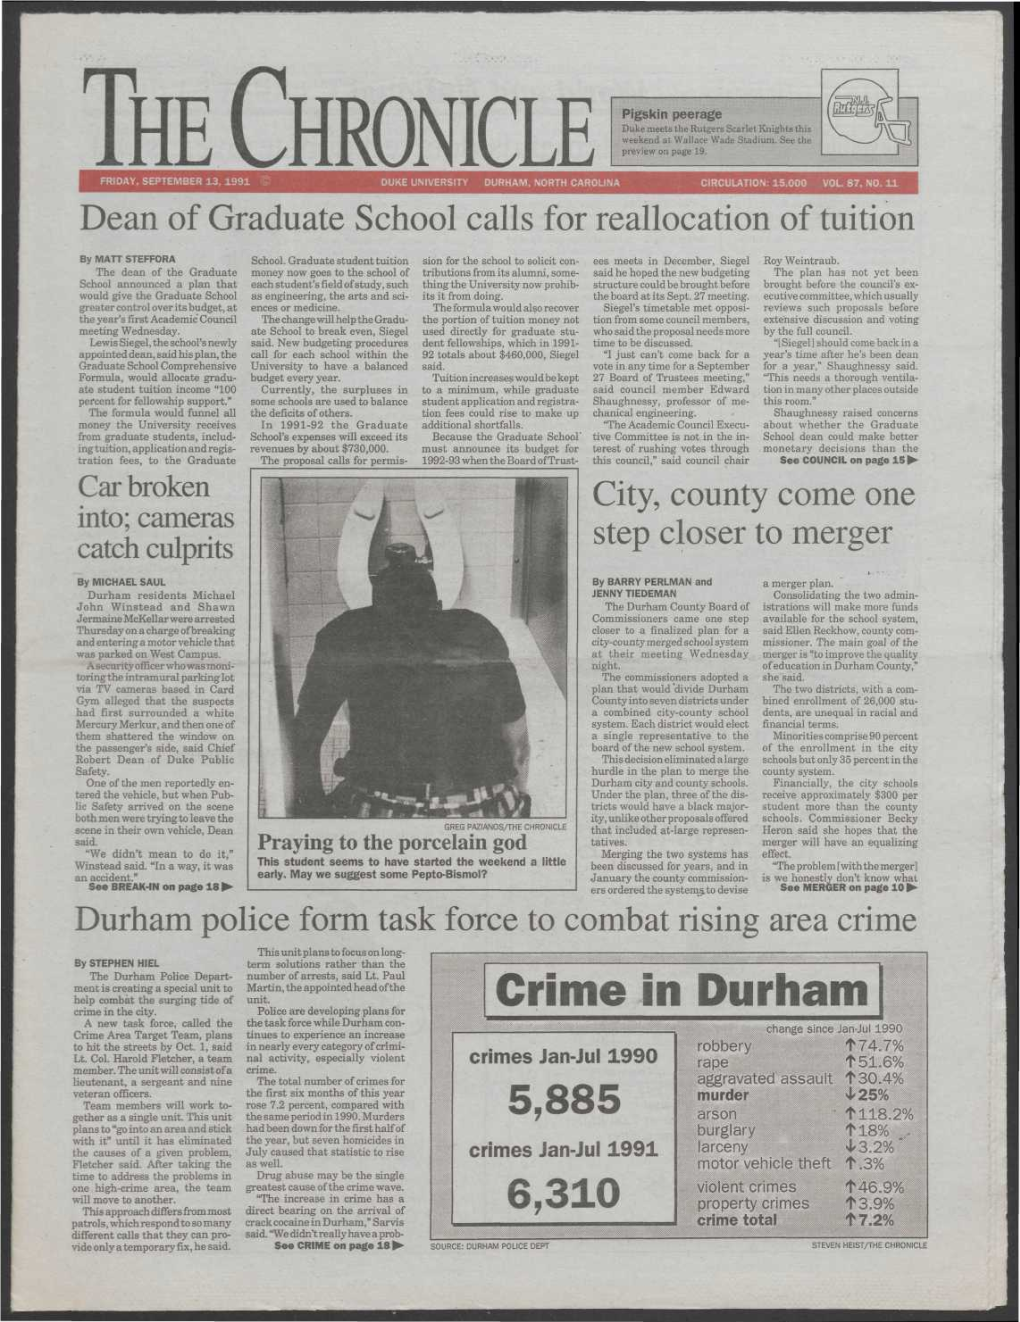 Crime in Durham Crime in the City